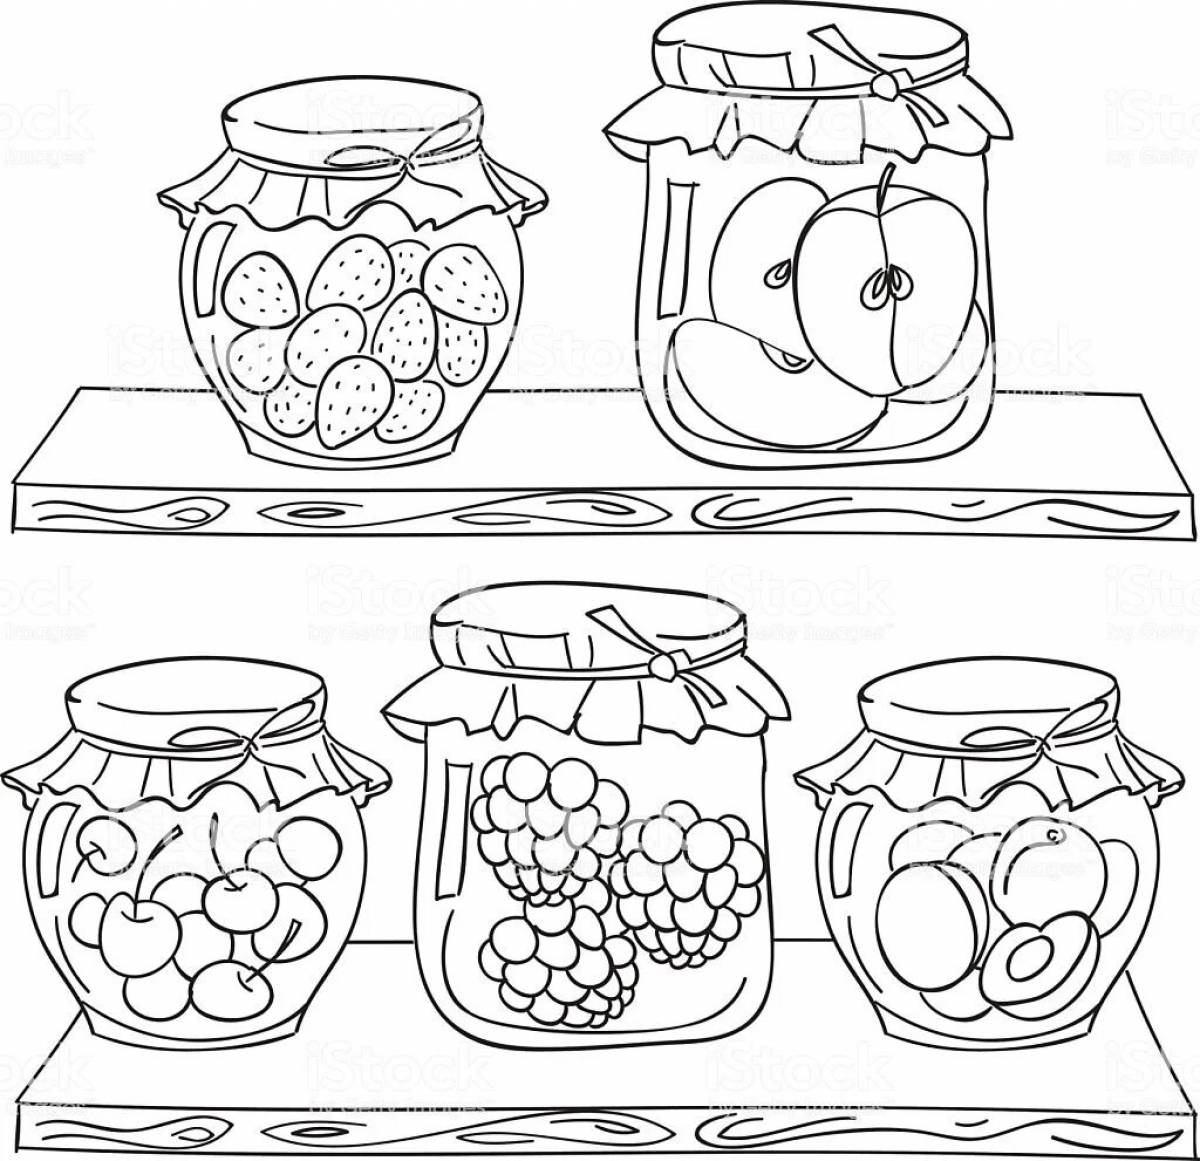 Coloring book magical compote for students